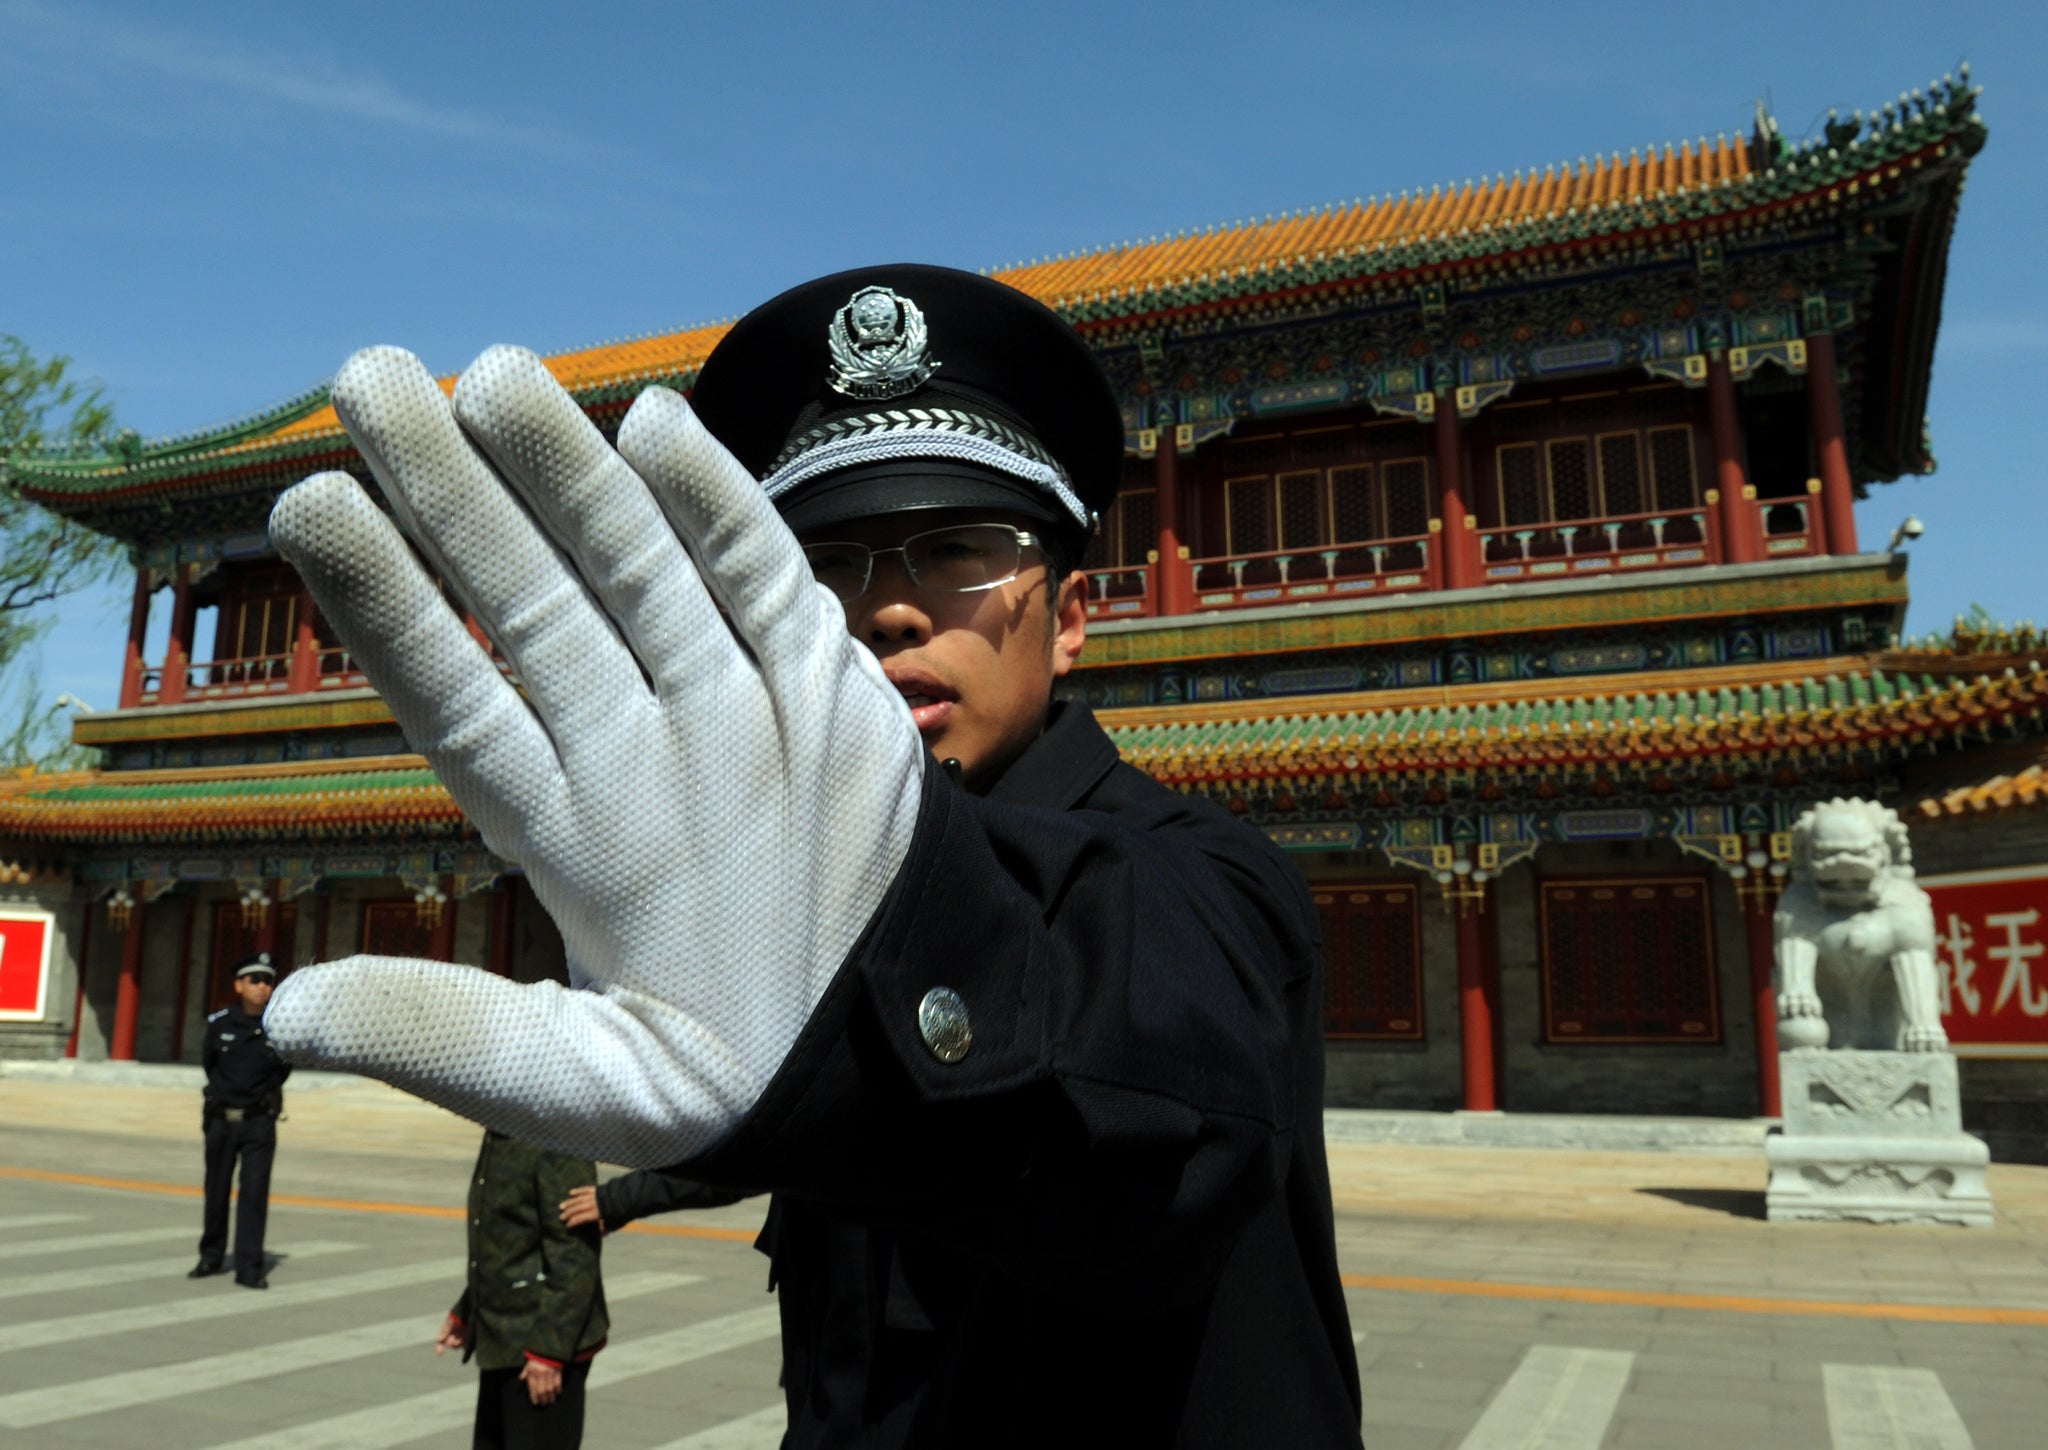 A Chinese policeman blocks photos being taken outside Zhongnanhai which serves as the central headquarters for the Communist Party of China